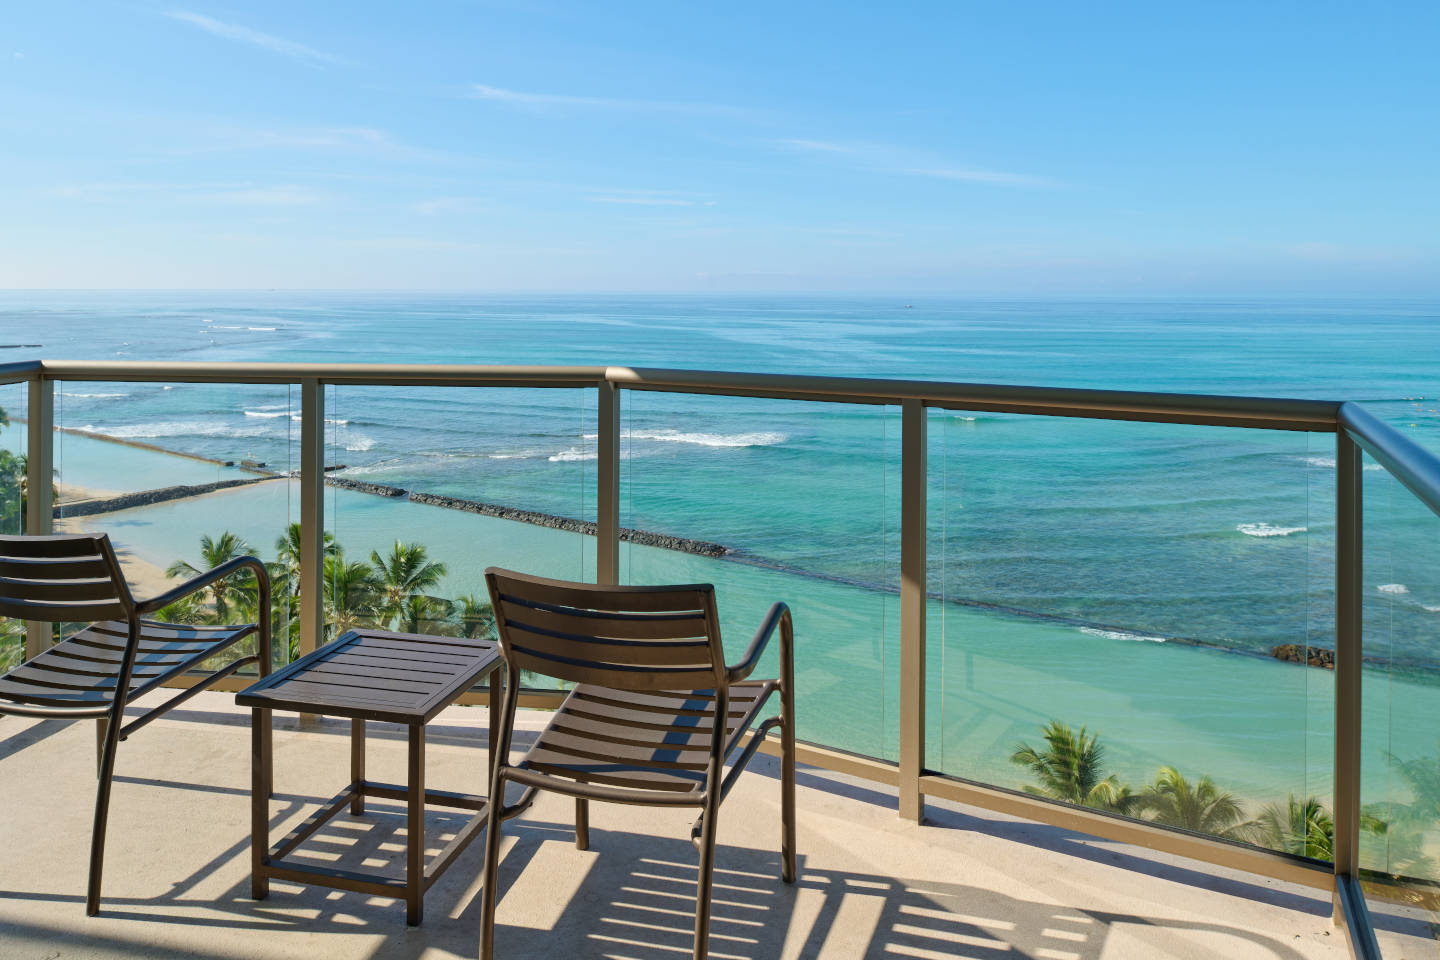 Unobstructed views of Waikiki Beach from the balcony of the Oceanfront Deluxe room at the Aston Waikiki Circle Hotel